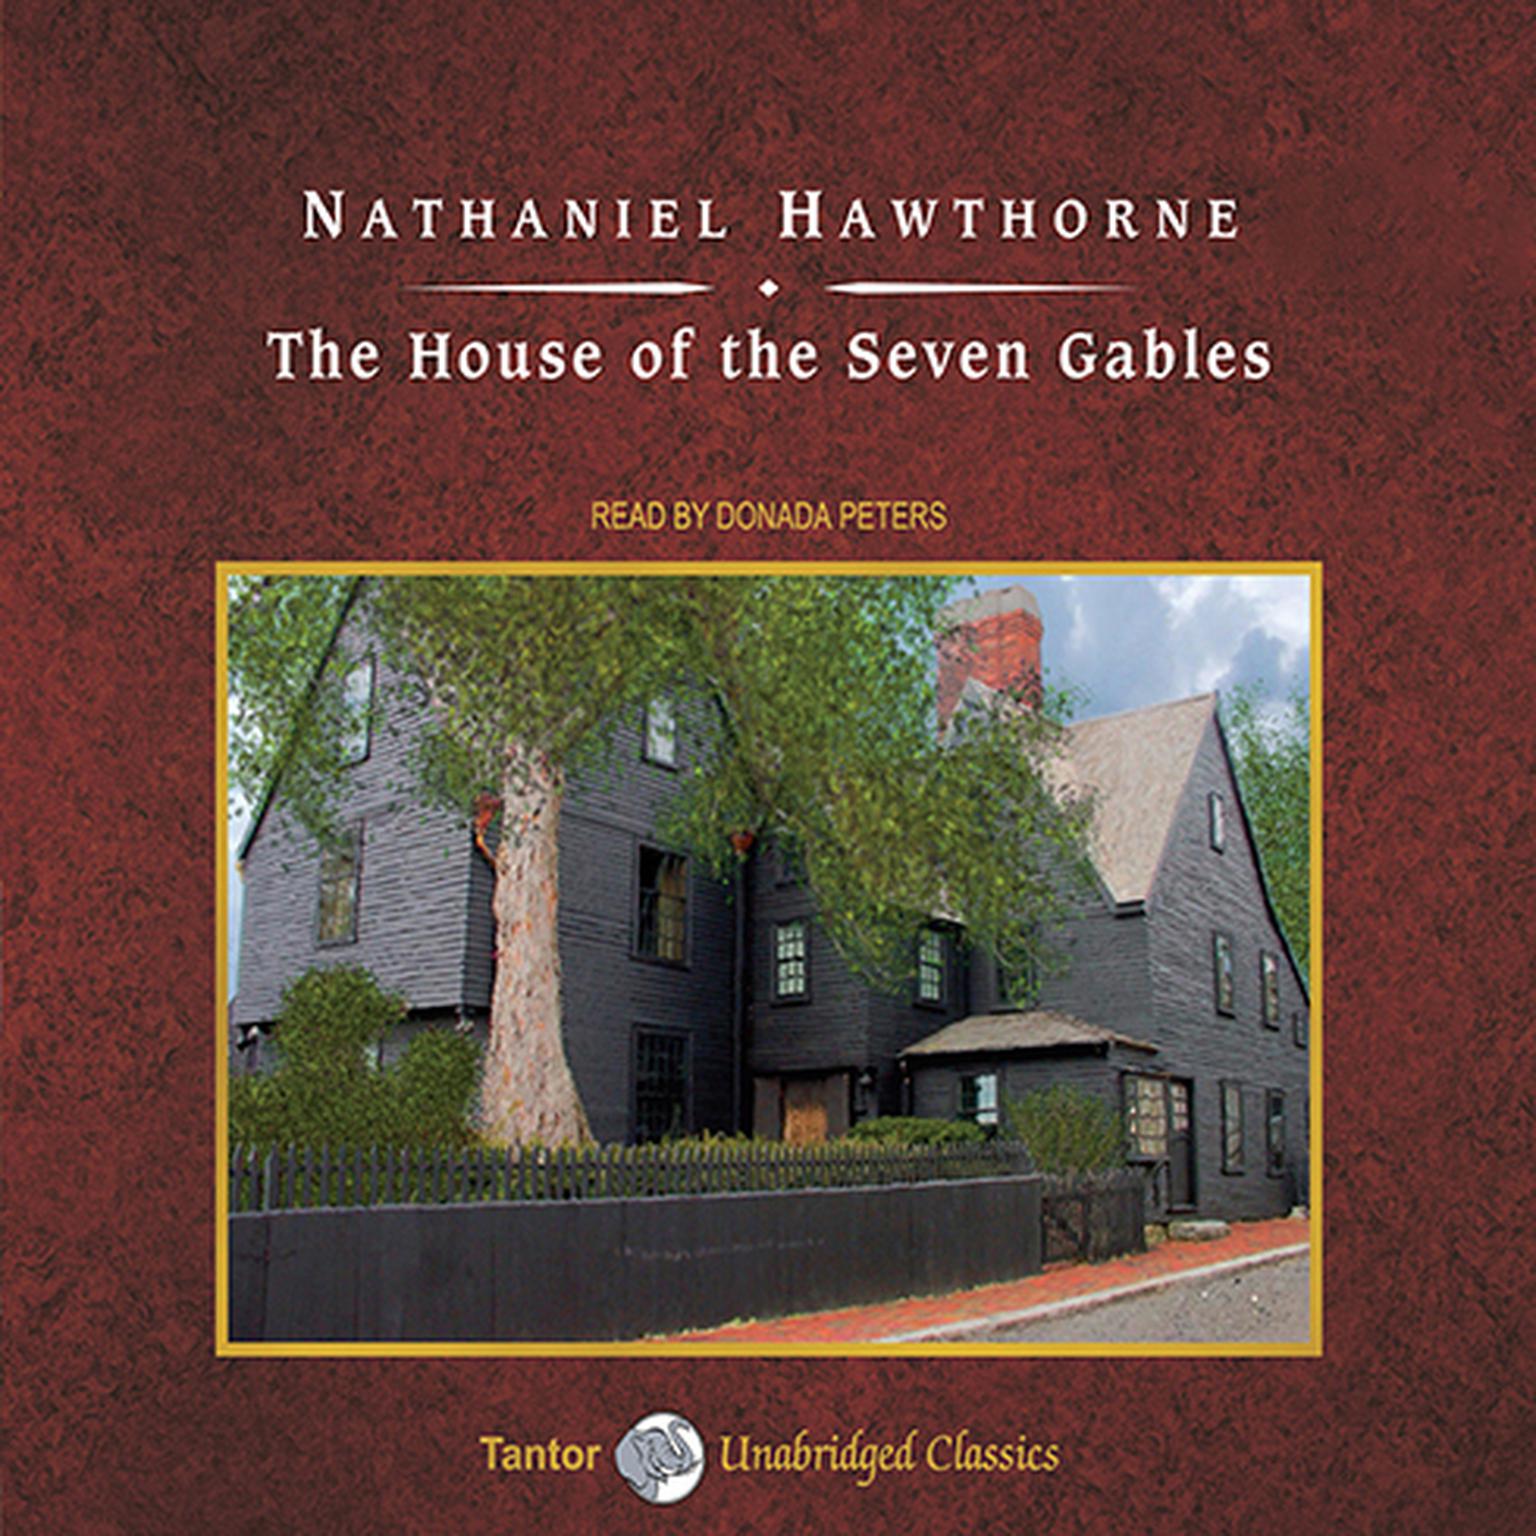 The House of the Seven Gables, with eBook Audiobook, by Nathaniel Hawthorne